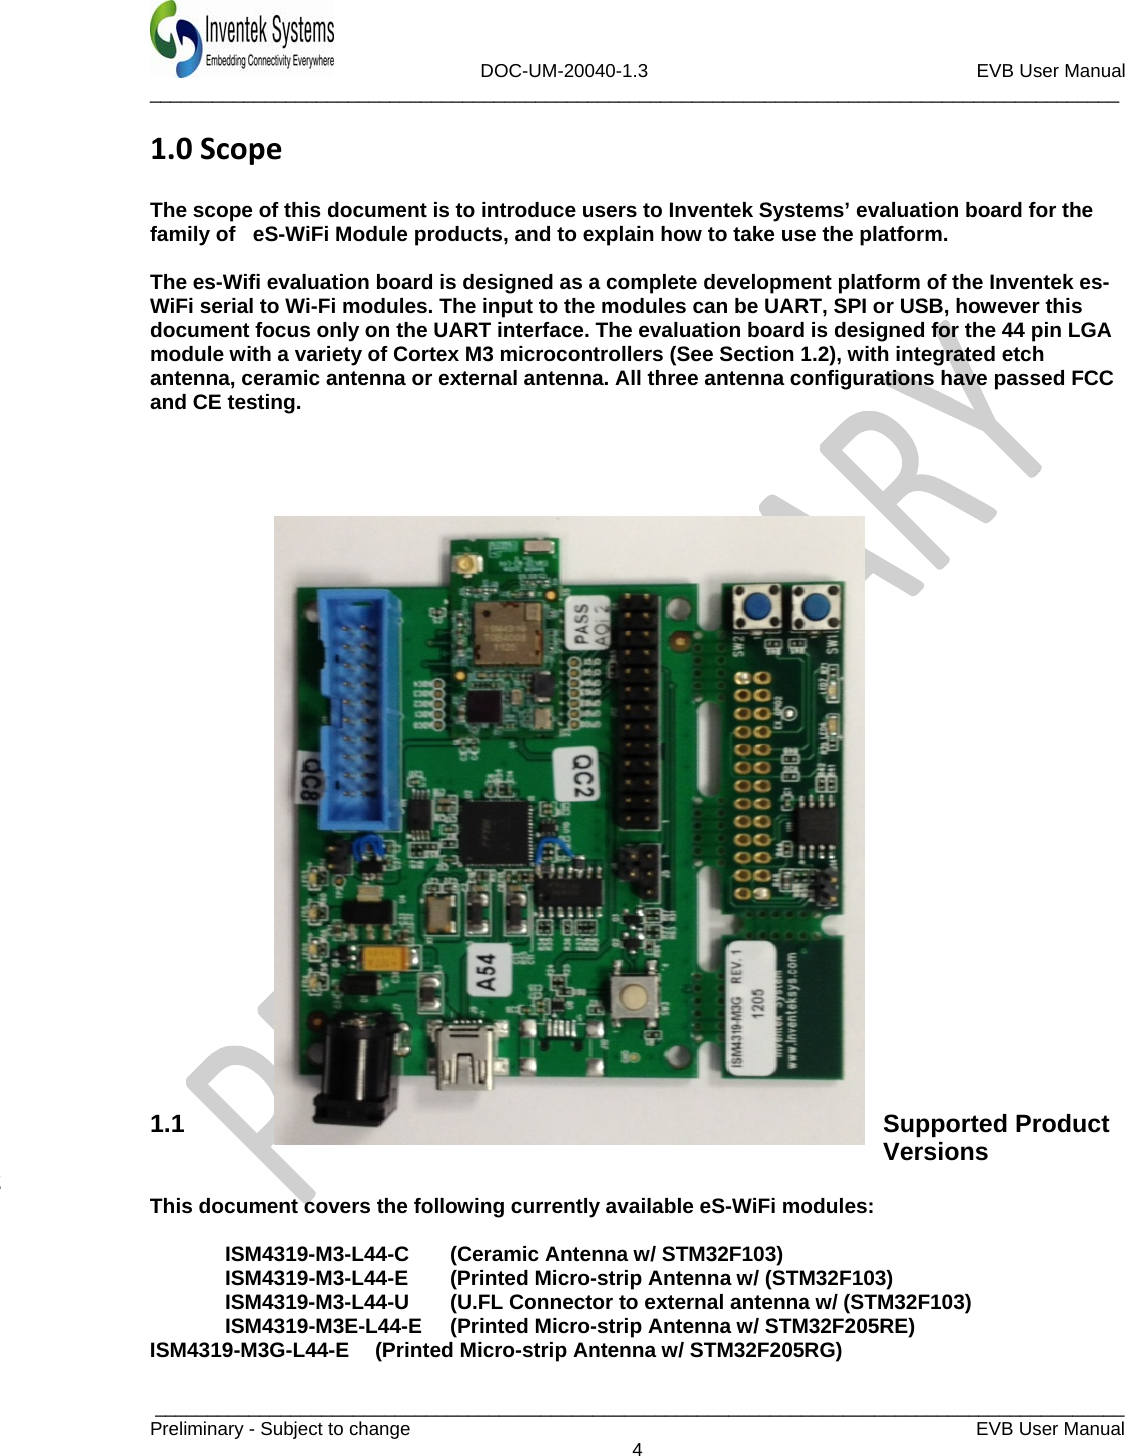                             DOC-UM-20040-1.3                                                         EVB User Manual  _____________________________________________________________________________________________  _____________________________________________________________________________________________Preliminary - Subject to change   EVB User Manual   4  1.0Scope The scope of this document is to introduce users to Inventek Systems’ evaluation board for the family of   eS-WiFi Module products, and to explain how to take use the platform.   The es-Wifi evaluation board is designed as a complete development platform of the Inventek es-WiFi serial to Wi-Fi modules. The input to the modules can be UART, SPI or USB, however this document focus only on the UART interface. The evaluation board is designed for the 44 pin LGA module with a variety of Cortex M3 microcontrollers (See Section 1.2), with integrated etch antenna, ceramic antenna or external antenna. All three antenna configurations have passed FCC and CE testing.                              1.1 Supported Product Versions 2  This document covers the following currently available eS-WiFi modules:    ISM4319-M3-L44-C  (Ceramic Antenna w/ STM32F103)  ISM4319-M3-L44-E (Printed Micro-strip Antenna w/ (STM32F103)   ISM4319-M3-L44-U  (U.FL Connector to external antenna w/ (STM32F103)   ISM4319-M3E-L44-E  (Printed Micro-strip Antenna w/ STM32F205RE) ISM4319-M3G-L44-E  (Printed Micro-strip Antenna w/ STM32F205RG) 